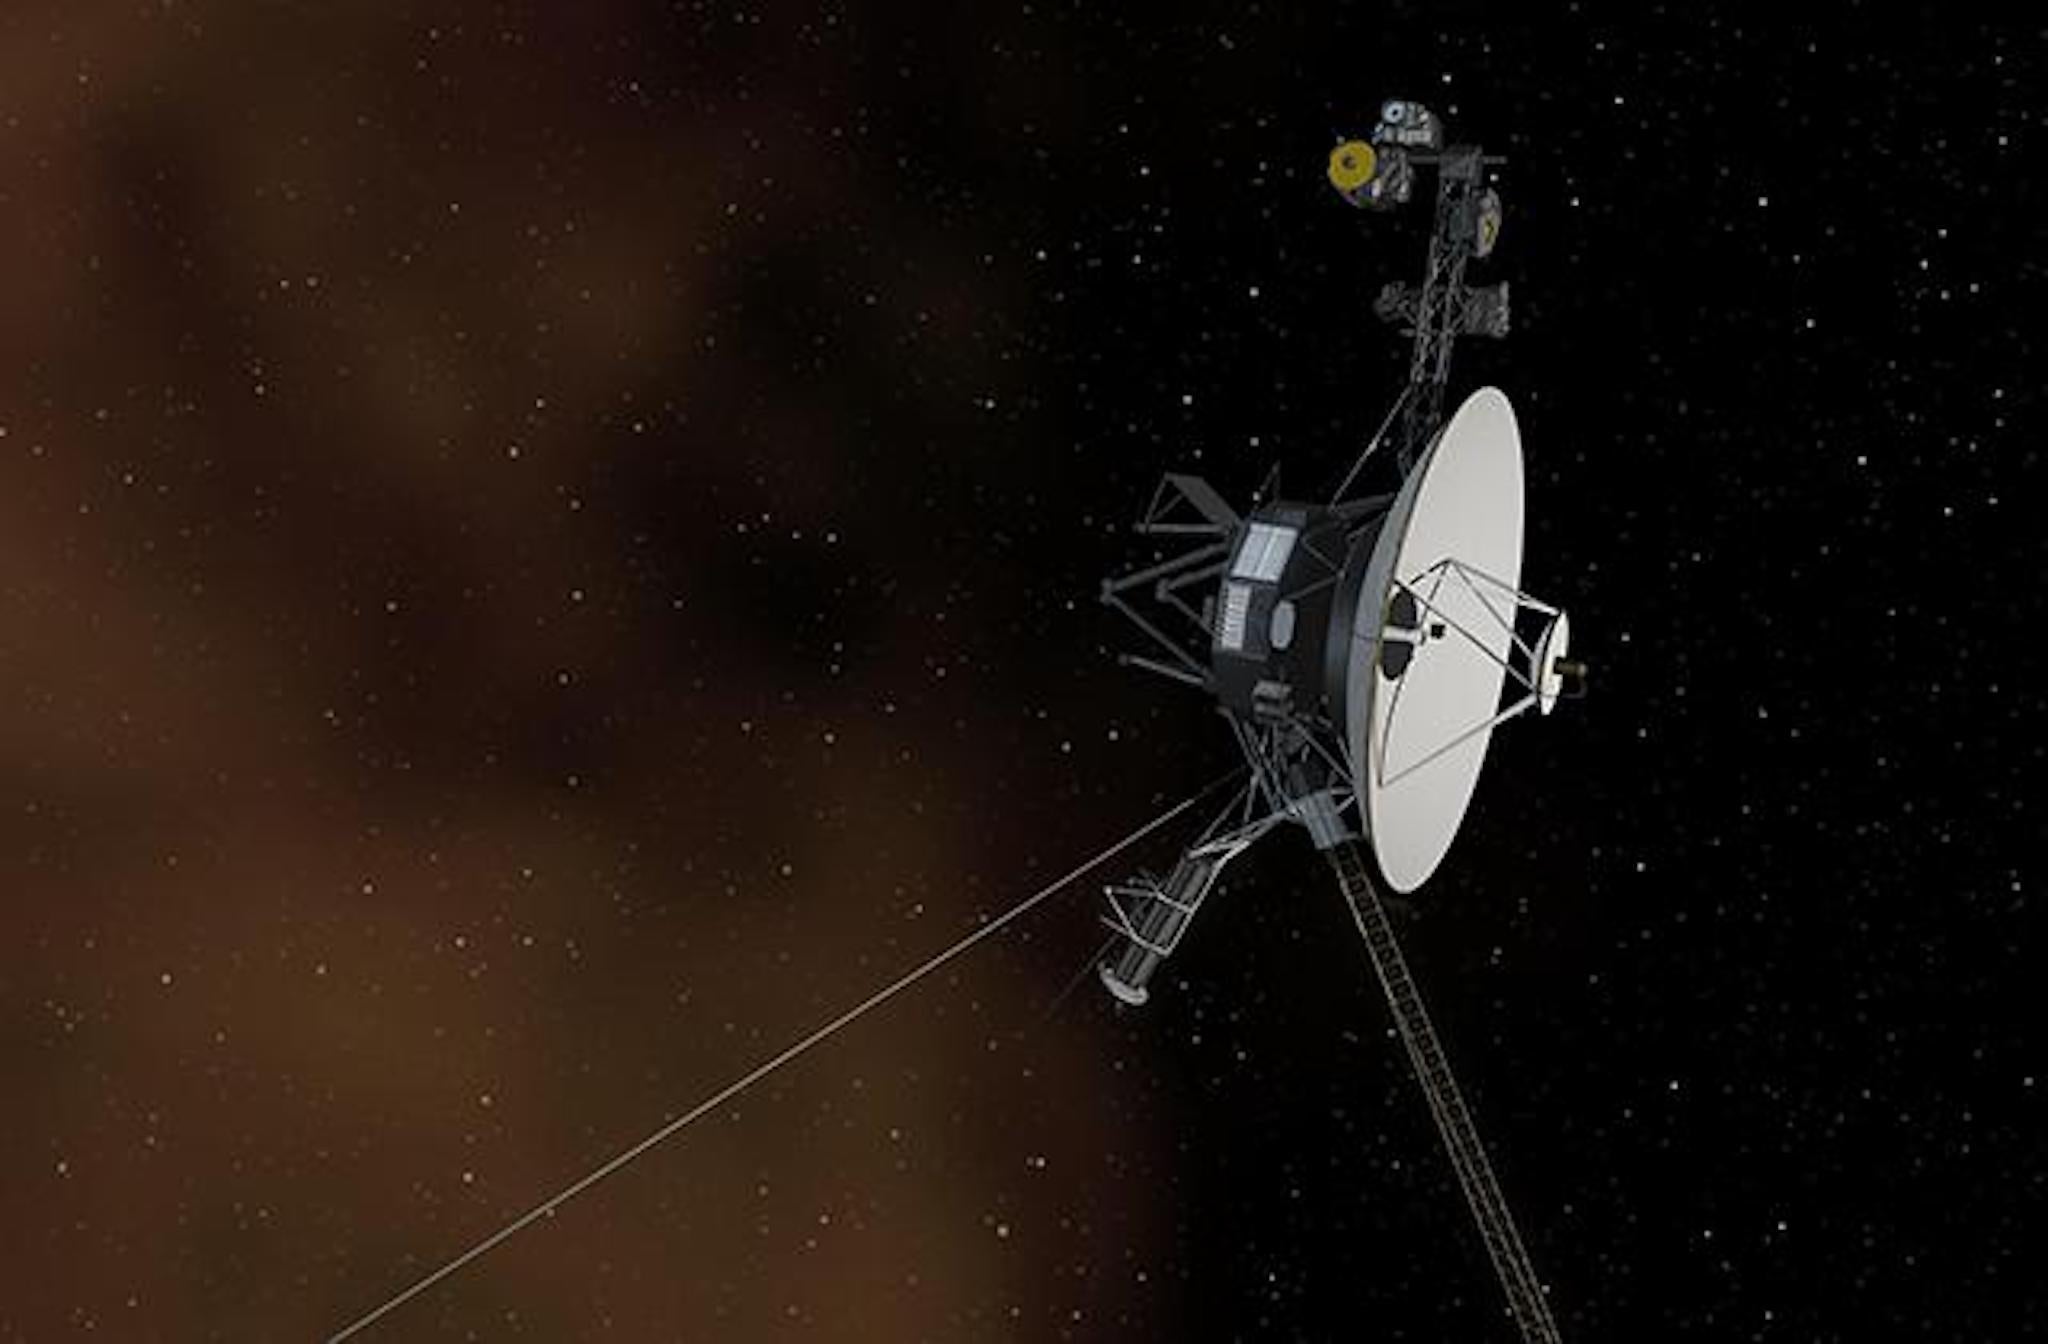 The Voyager spacecraft continue to make discoveries even as they travel through interstellar space